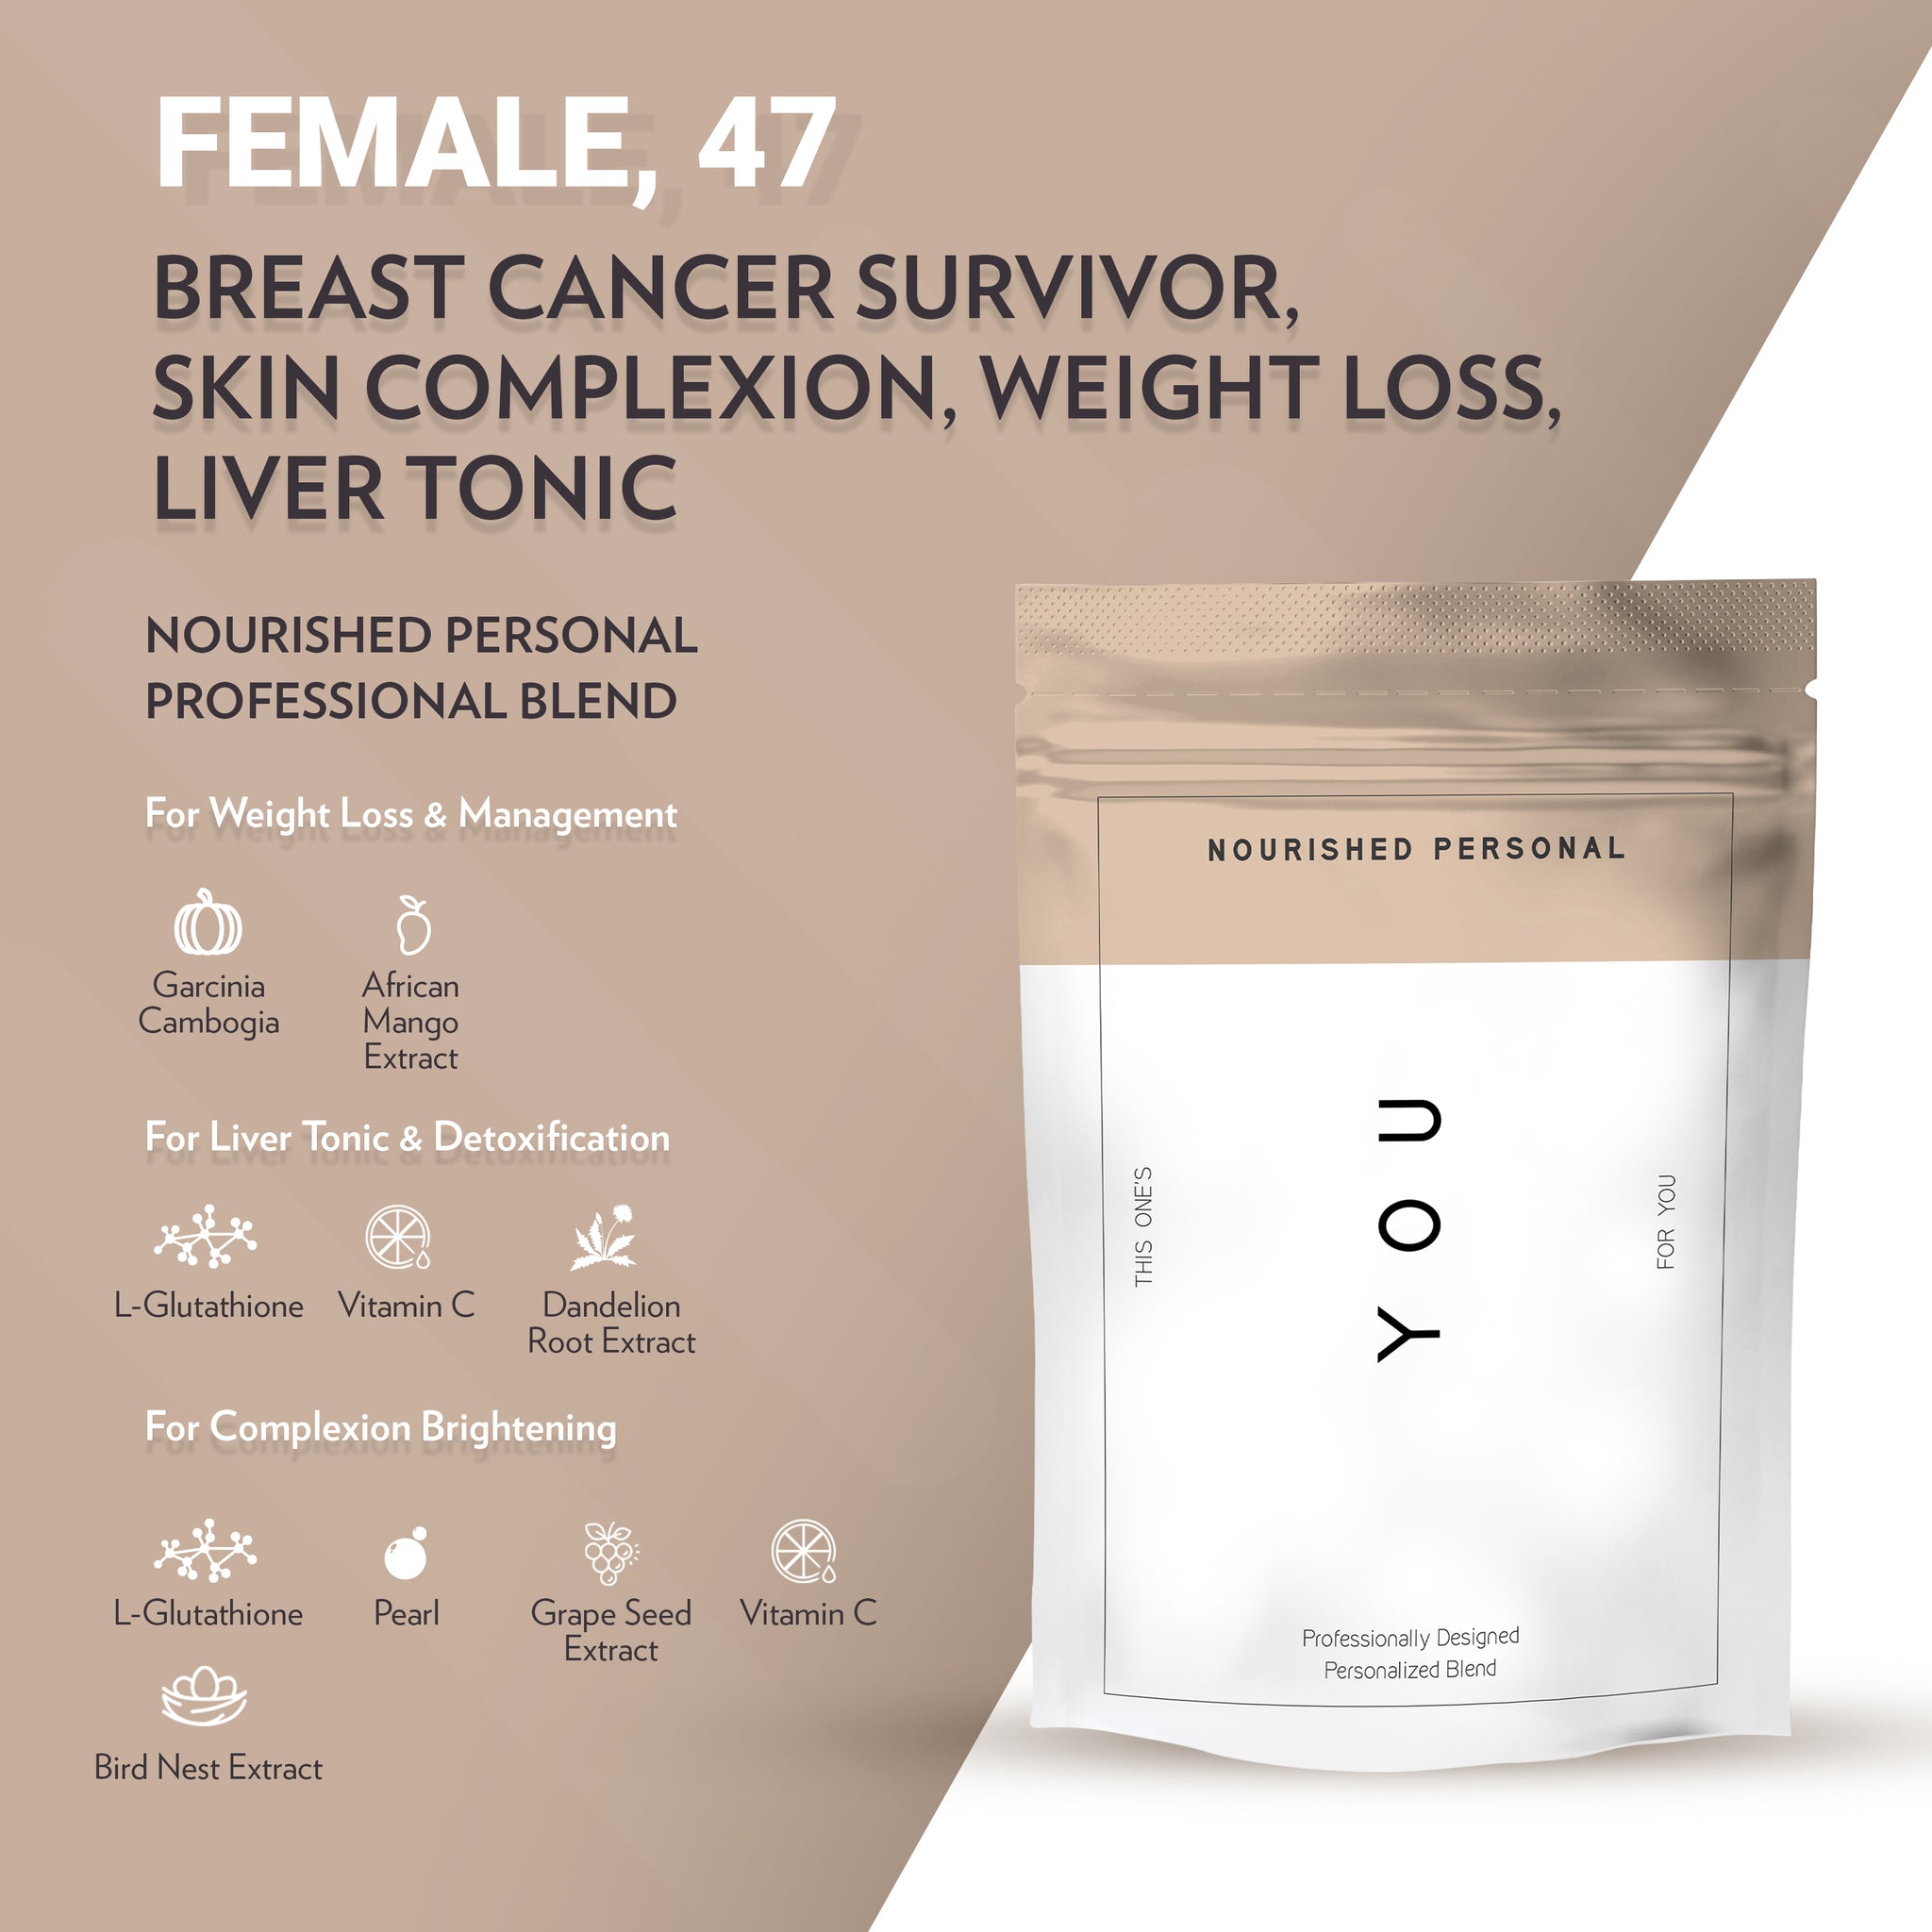 Case Study 33: Female, 47 - Breast Cancer Survivor, Skin Complexion, Weight Loss, Liver Tonic